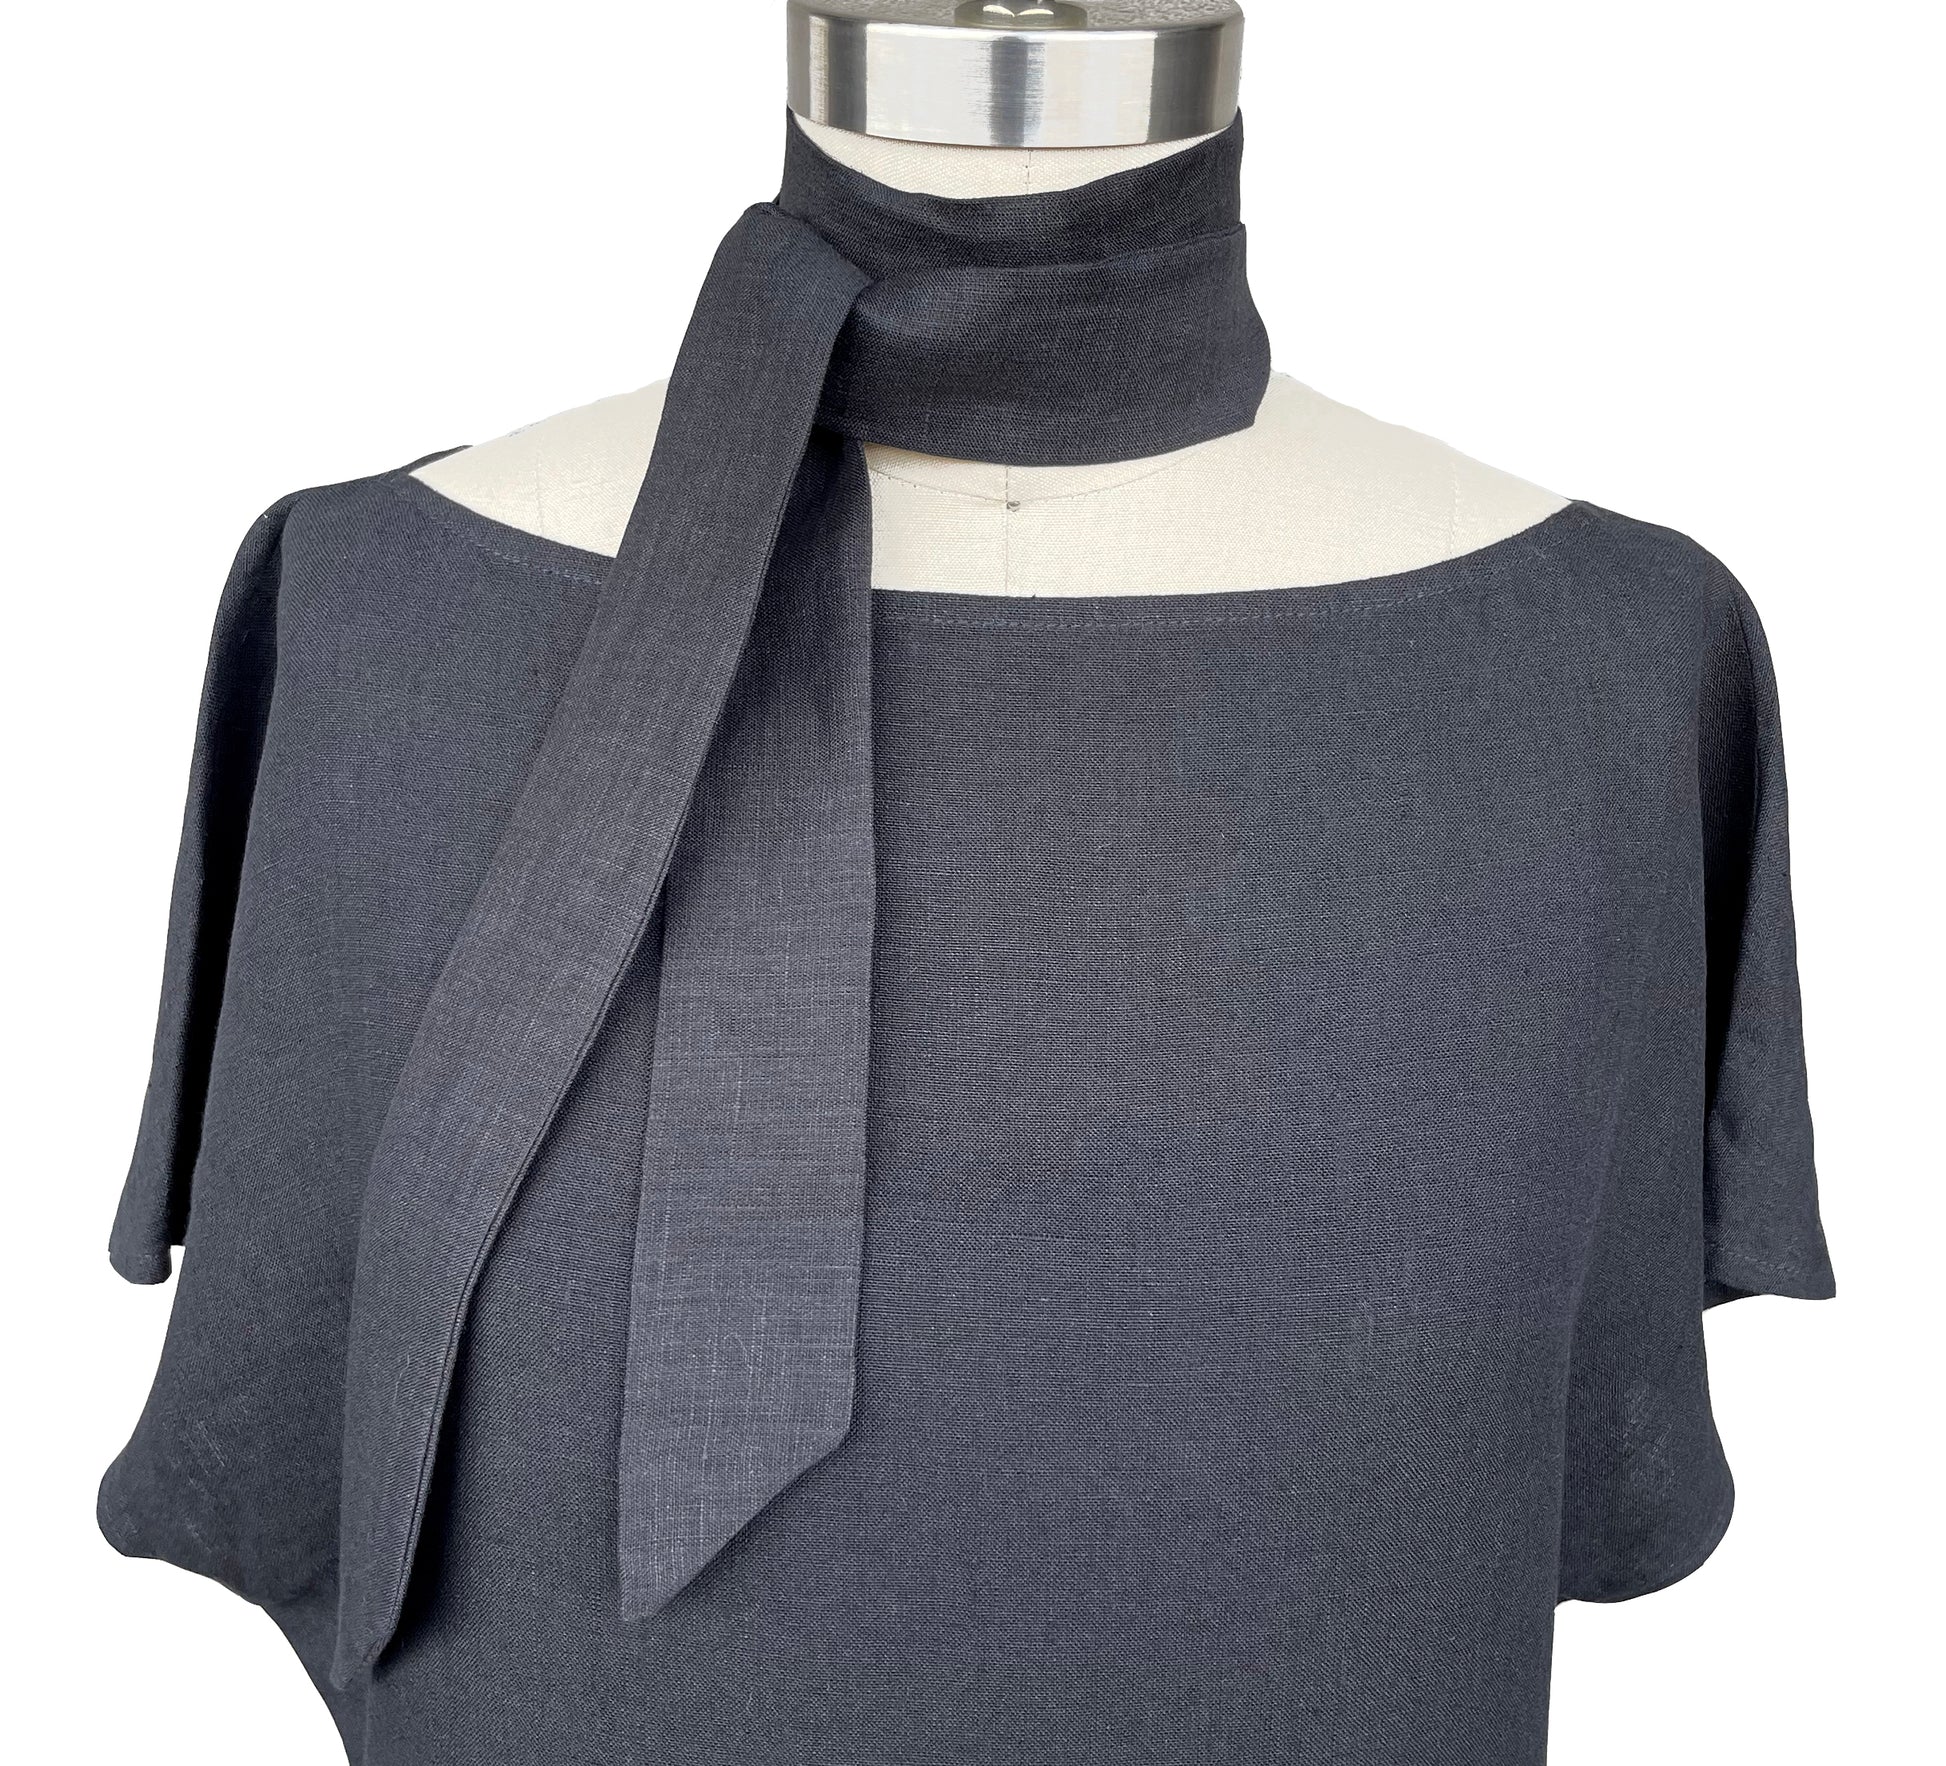 Thin black linen scarf for men and women